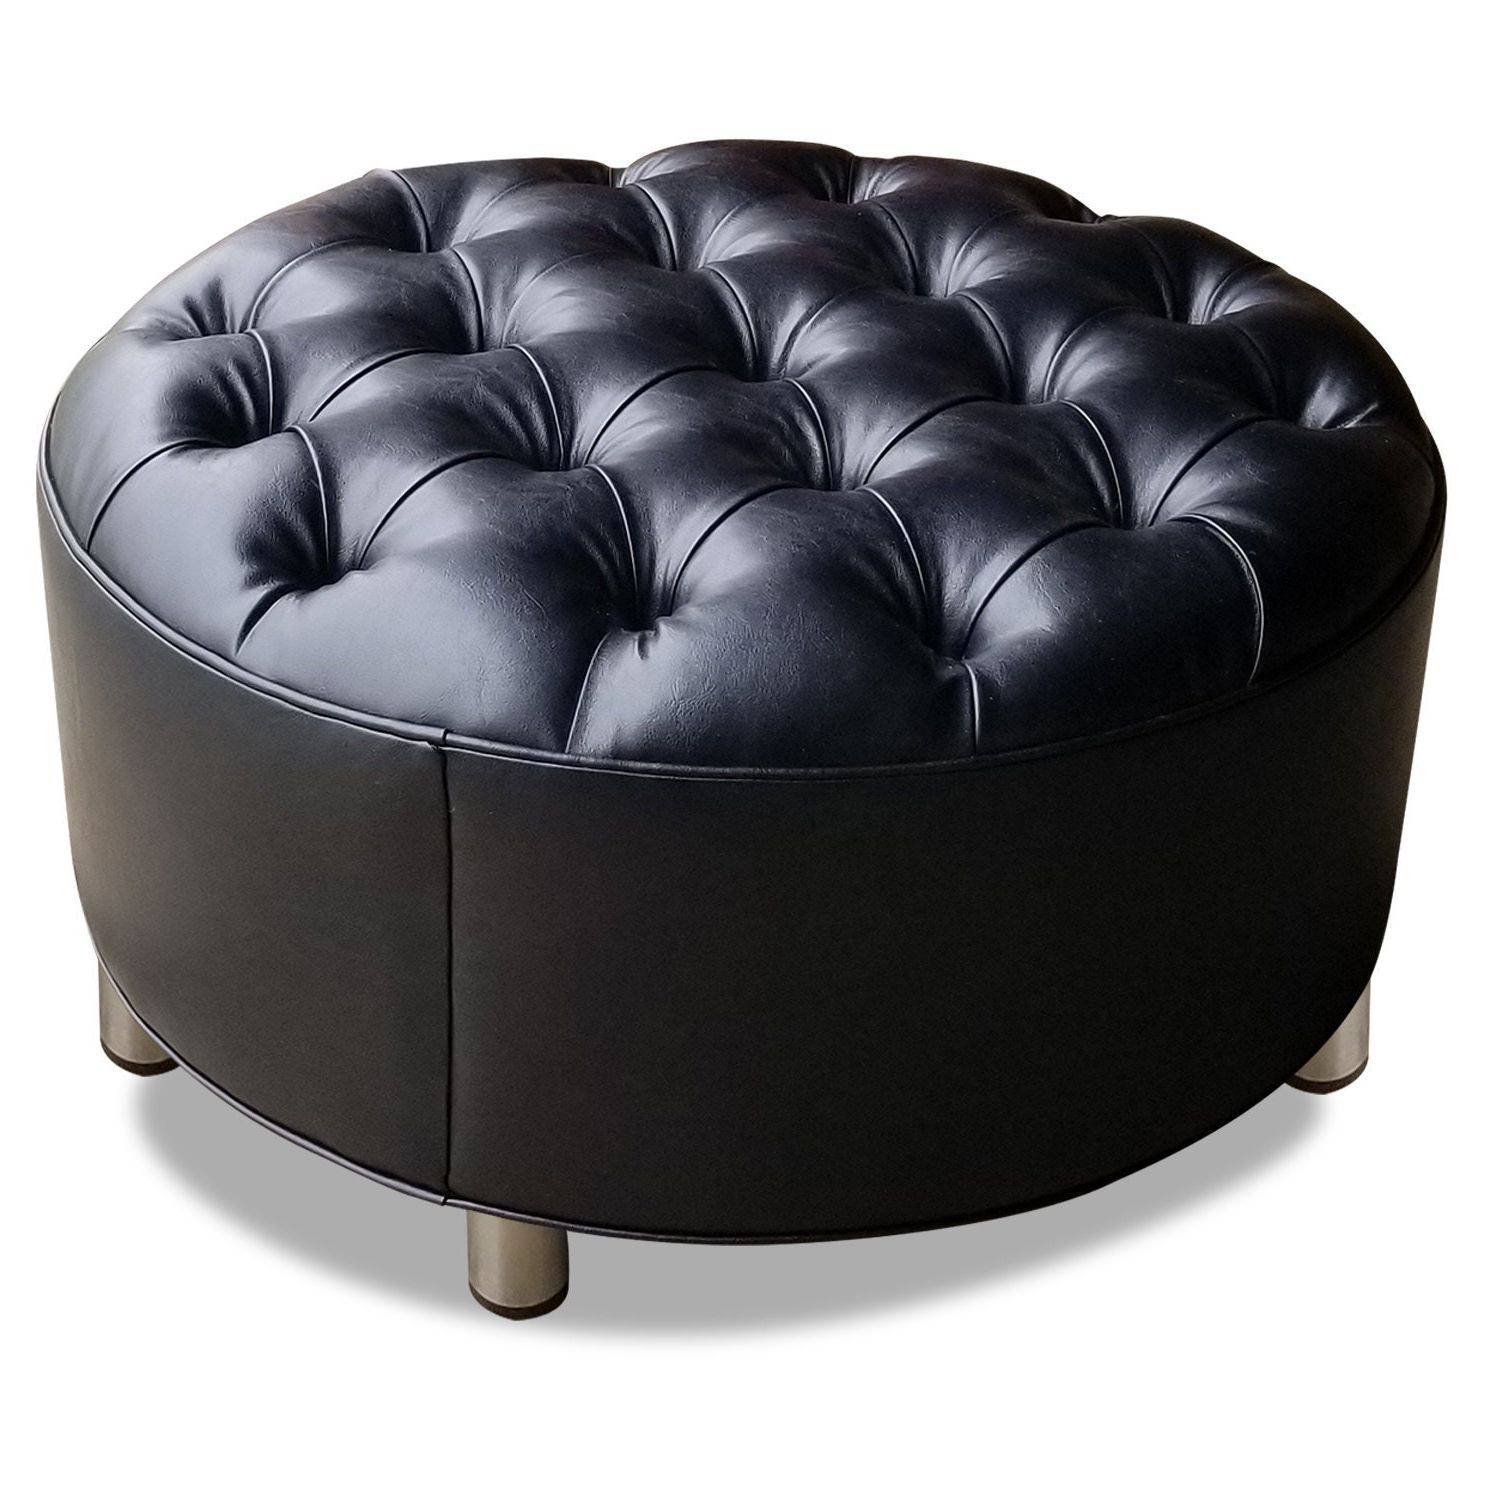 Best And Newest Modern Round Ottoman, Tufted, Black Vegan Leather, Chrome Metal Legs Inside Silver And White Leather Round Ottomans (View 6 of 10)